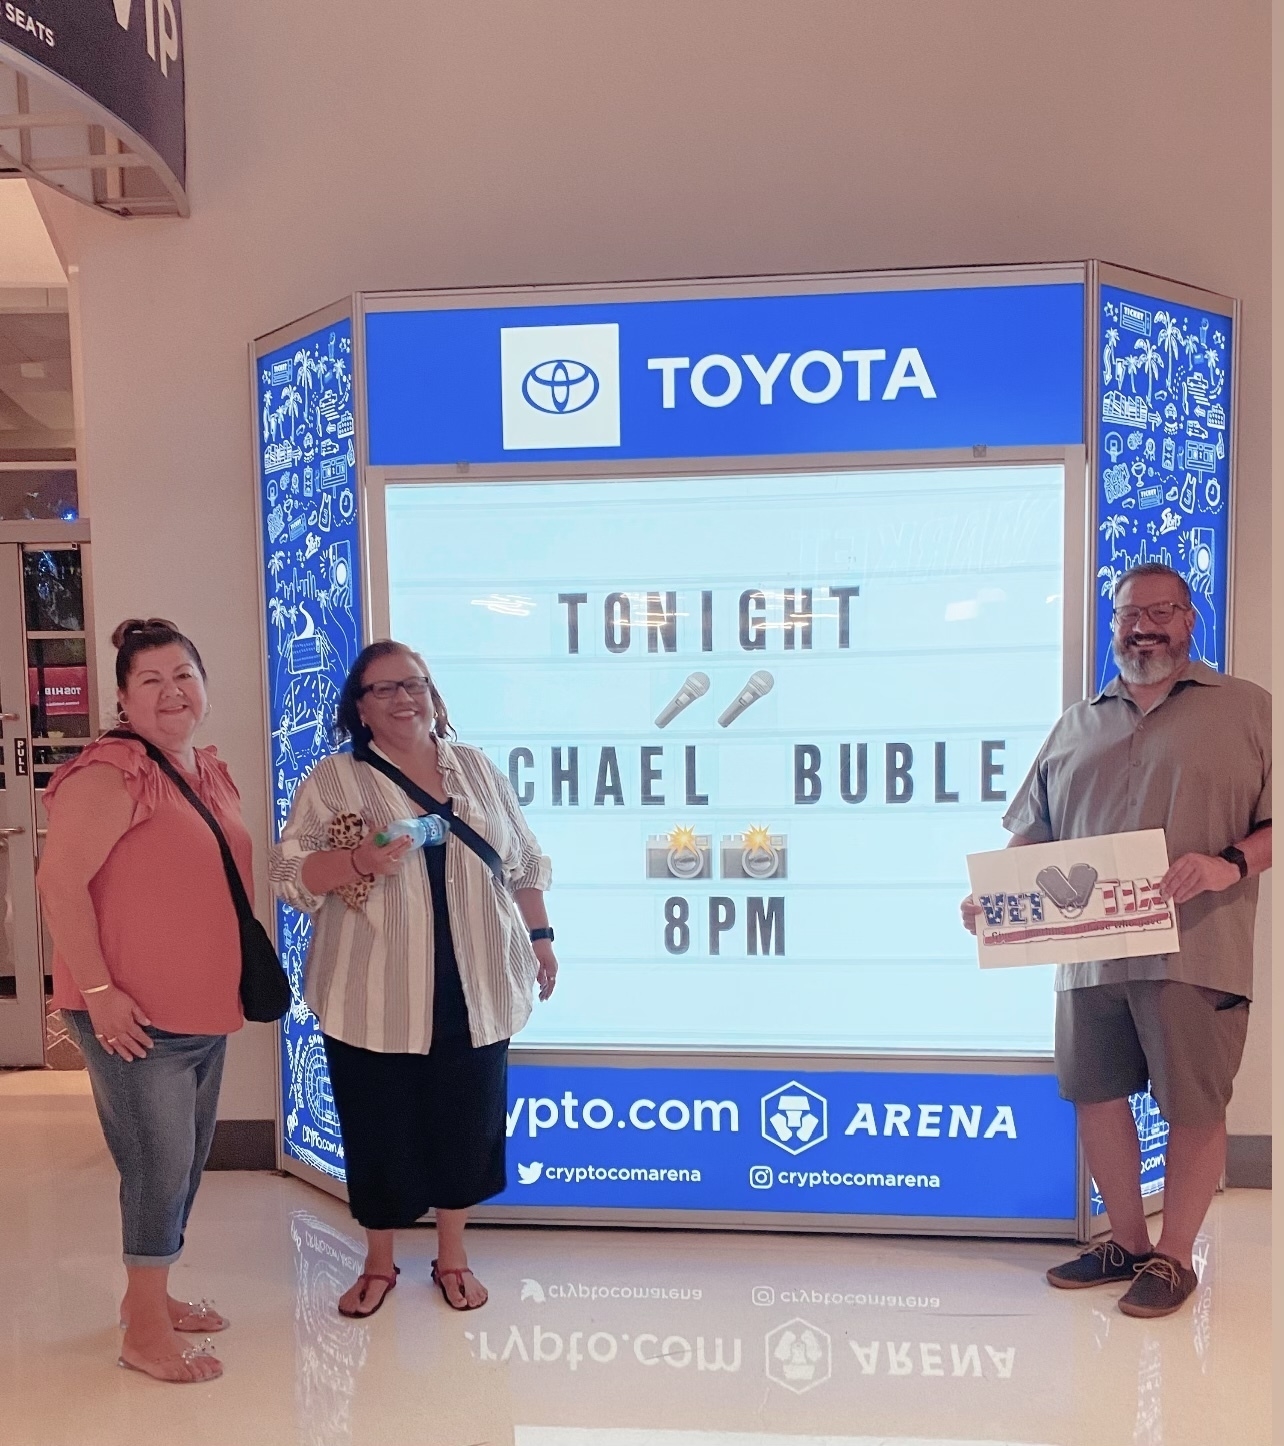 An Evening With Michael Buble